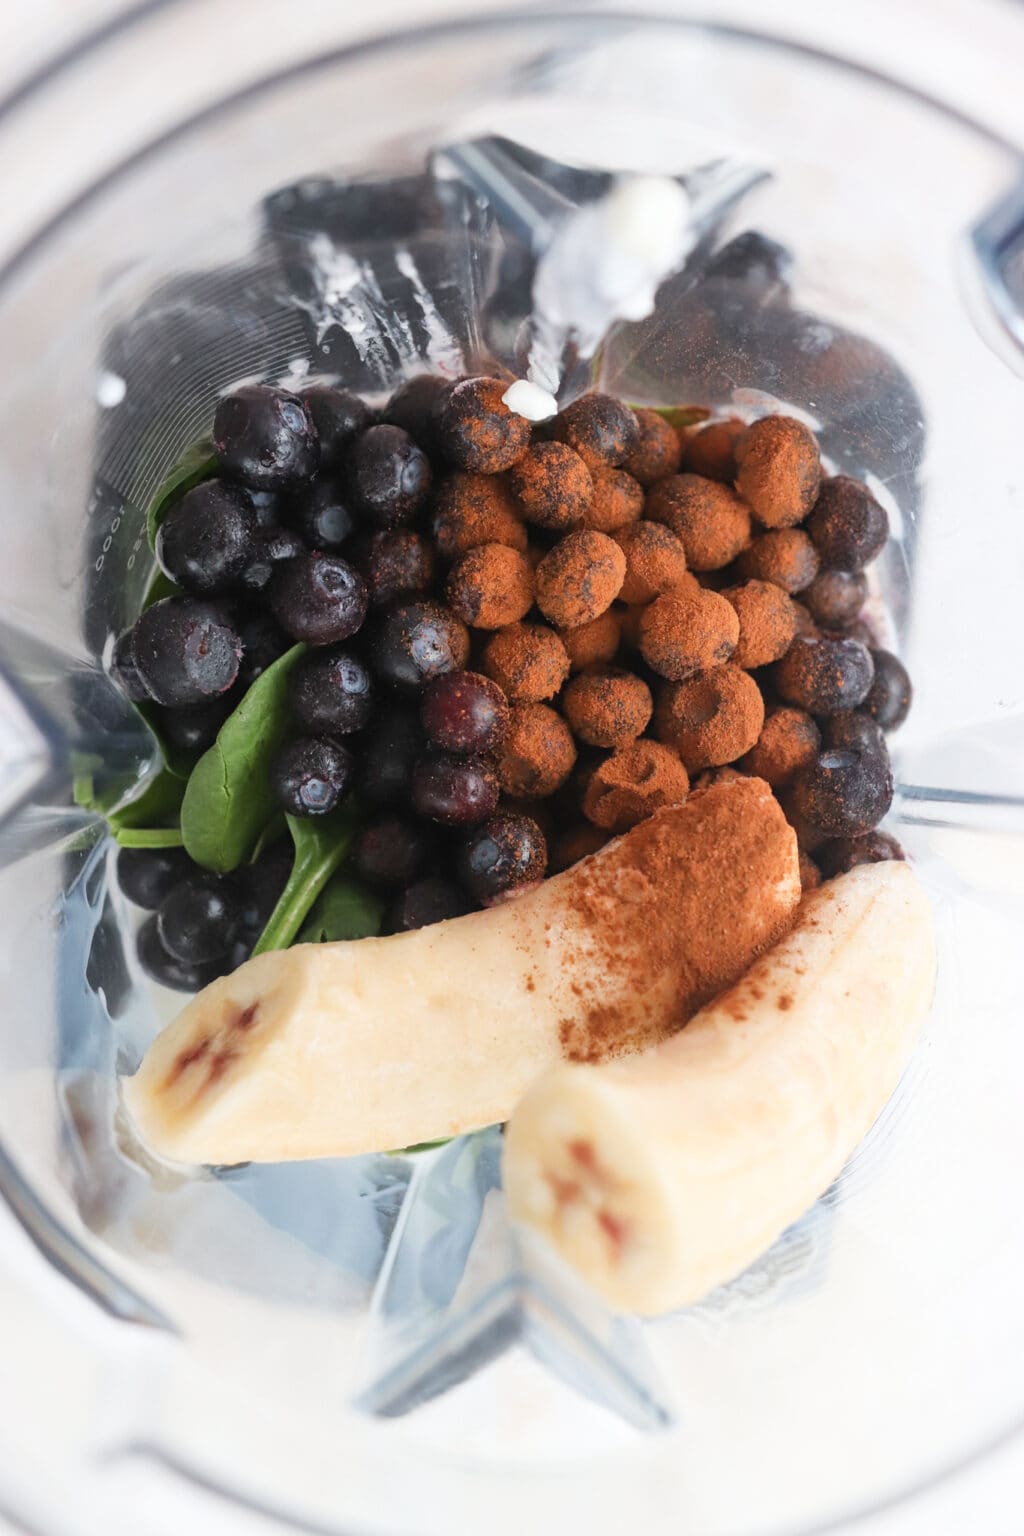 Ingredients for High Protein Blueberry Breakfast Smoothie in a blender, including blueberries, banana, cottage cheese, milk, cinnamon, spinach, chia seeds, hemp hearts